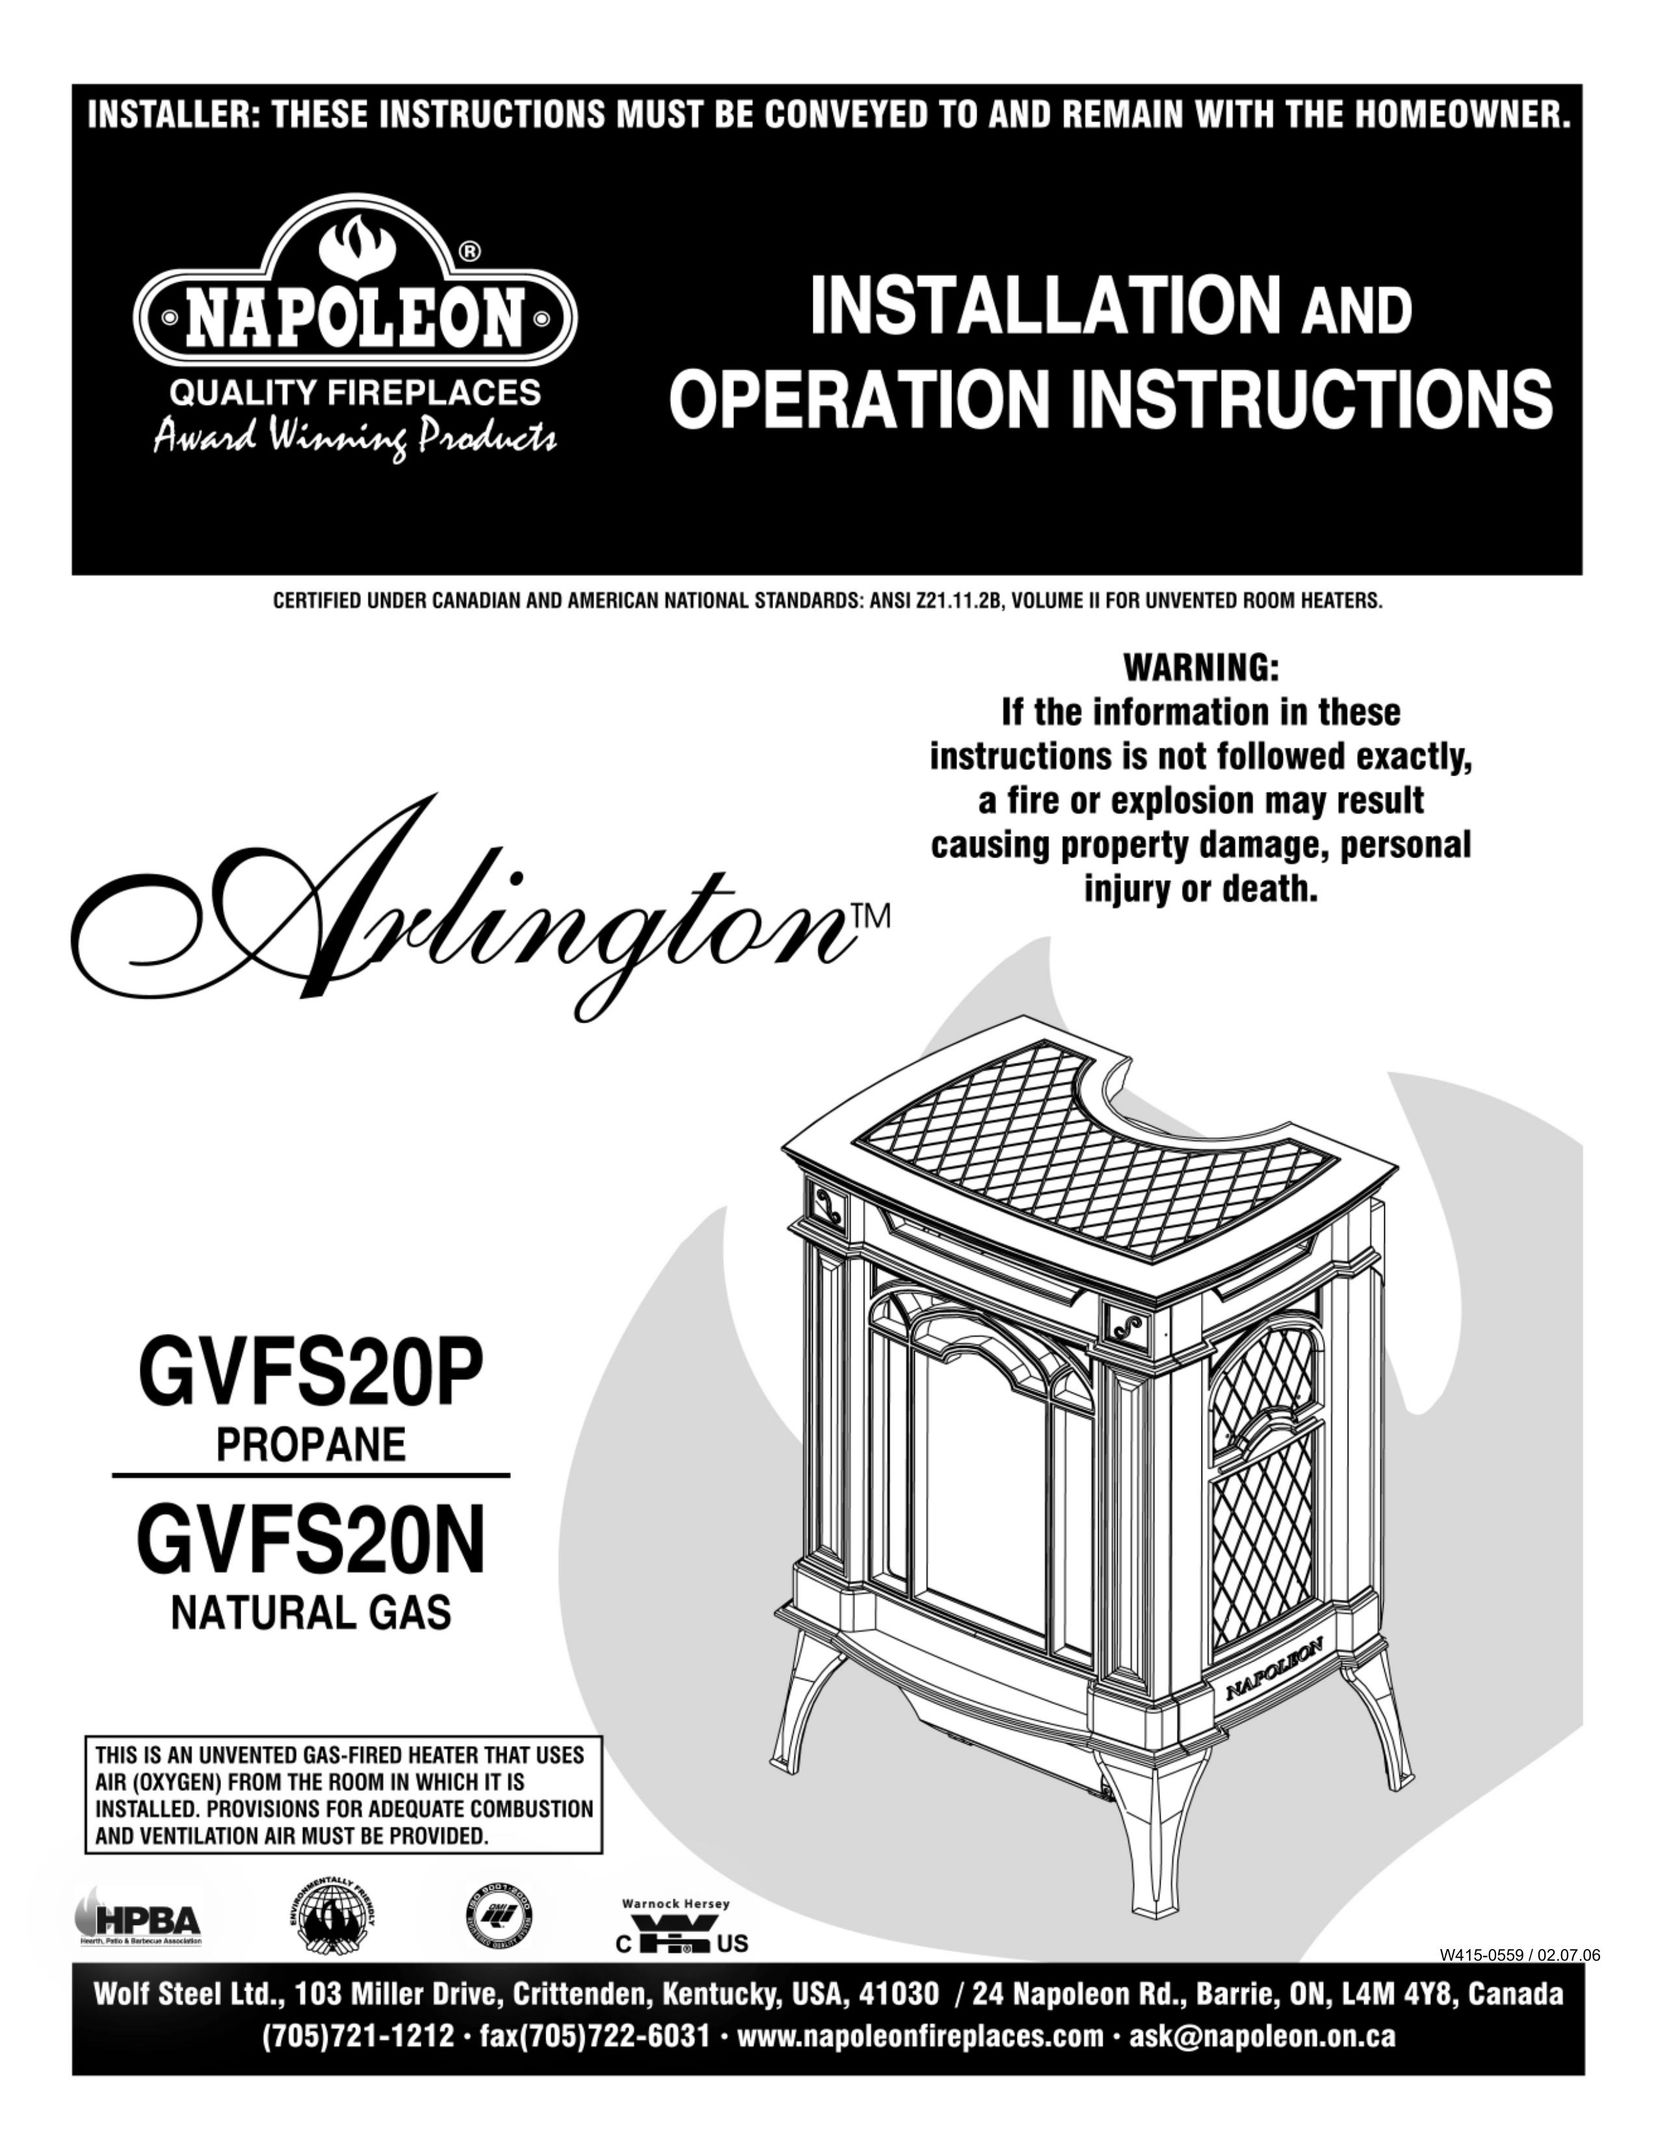 Napoleon Fireplaces GVFS20N Water Heater User Manual